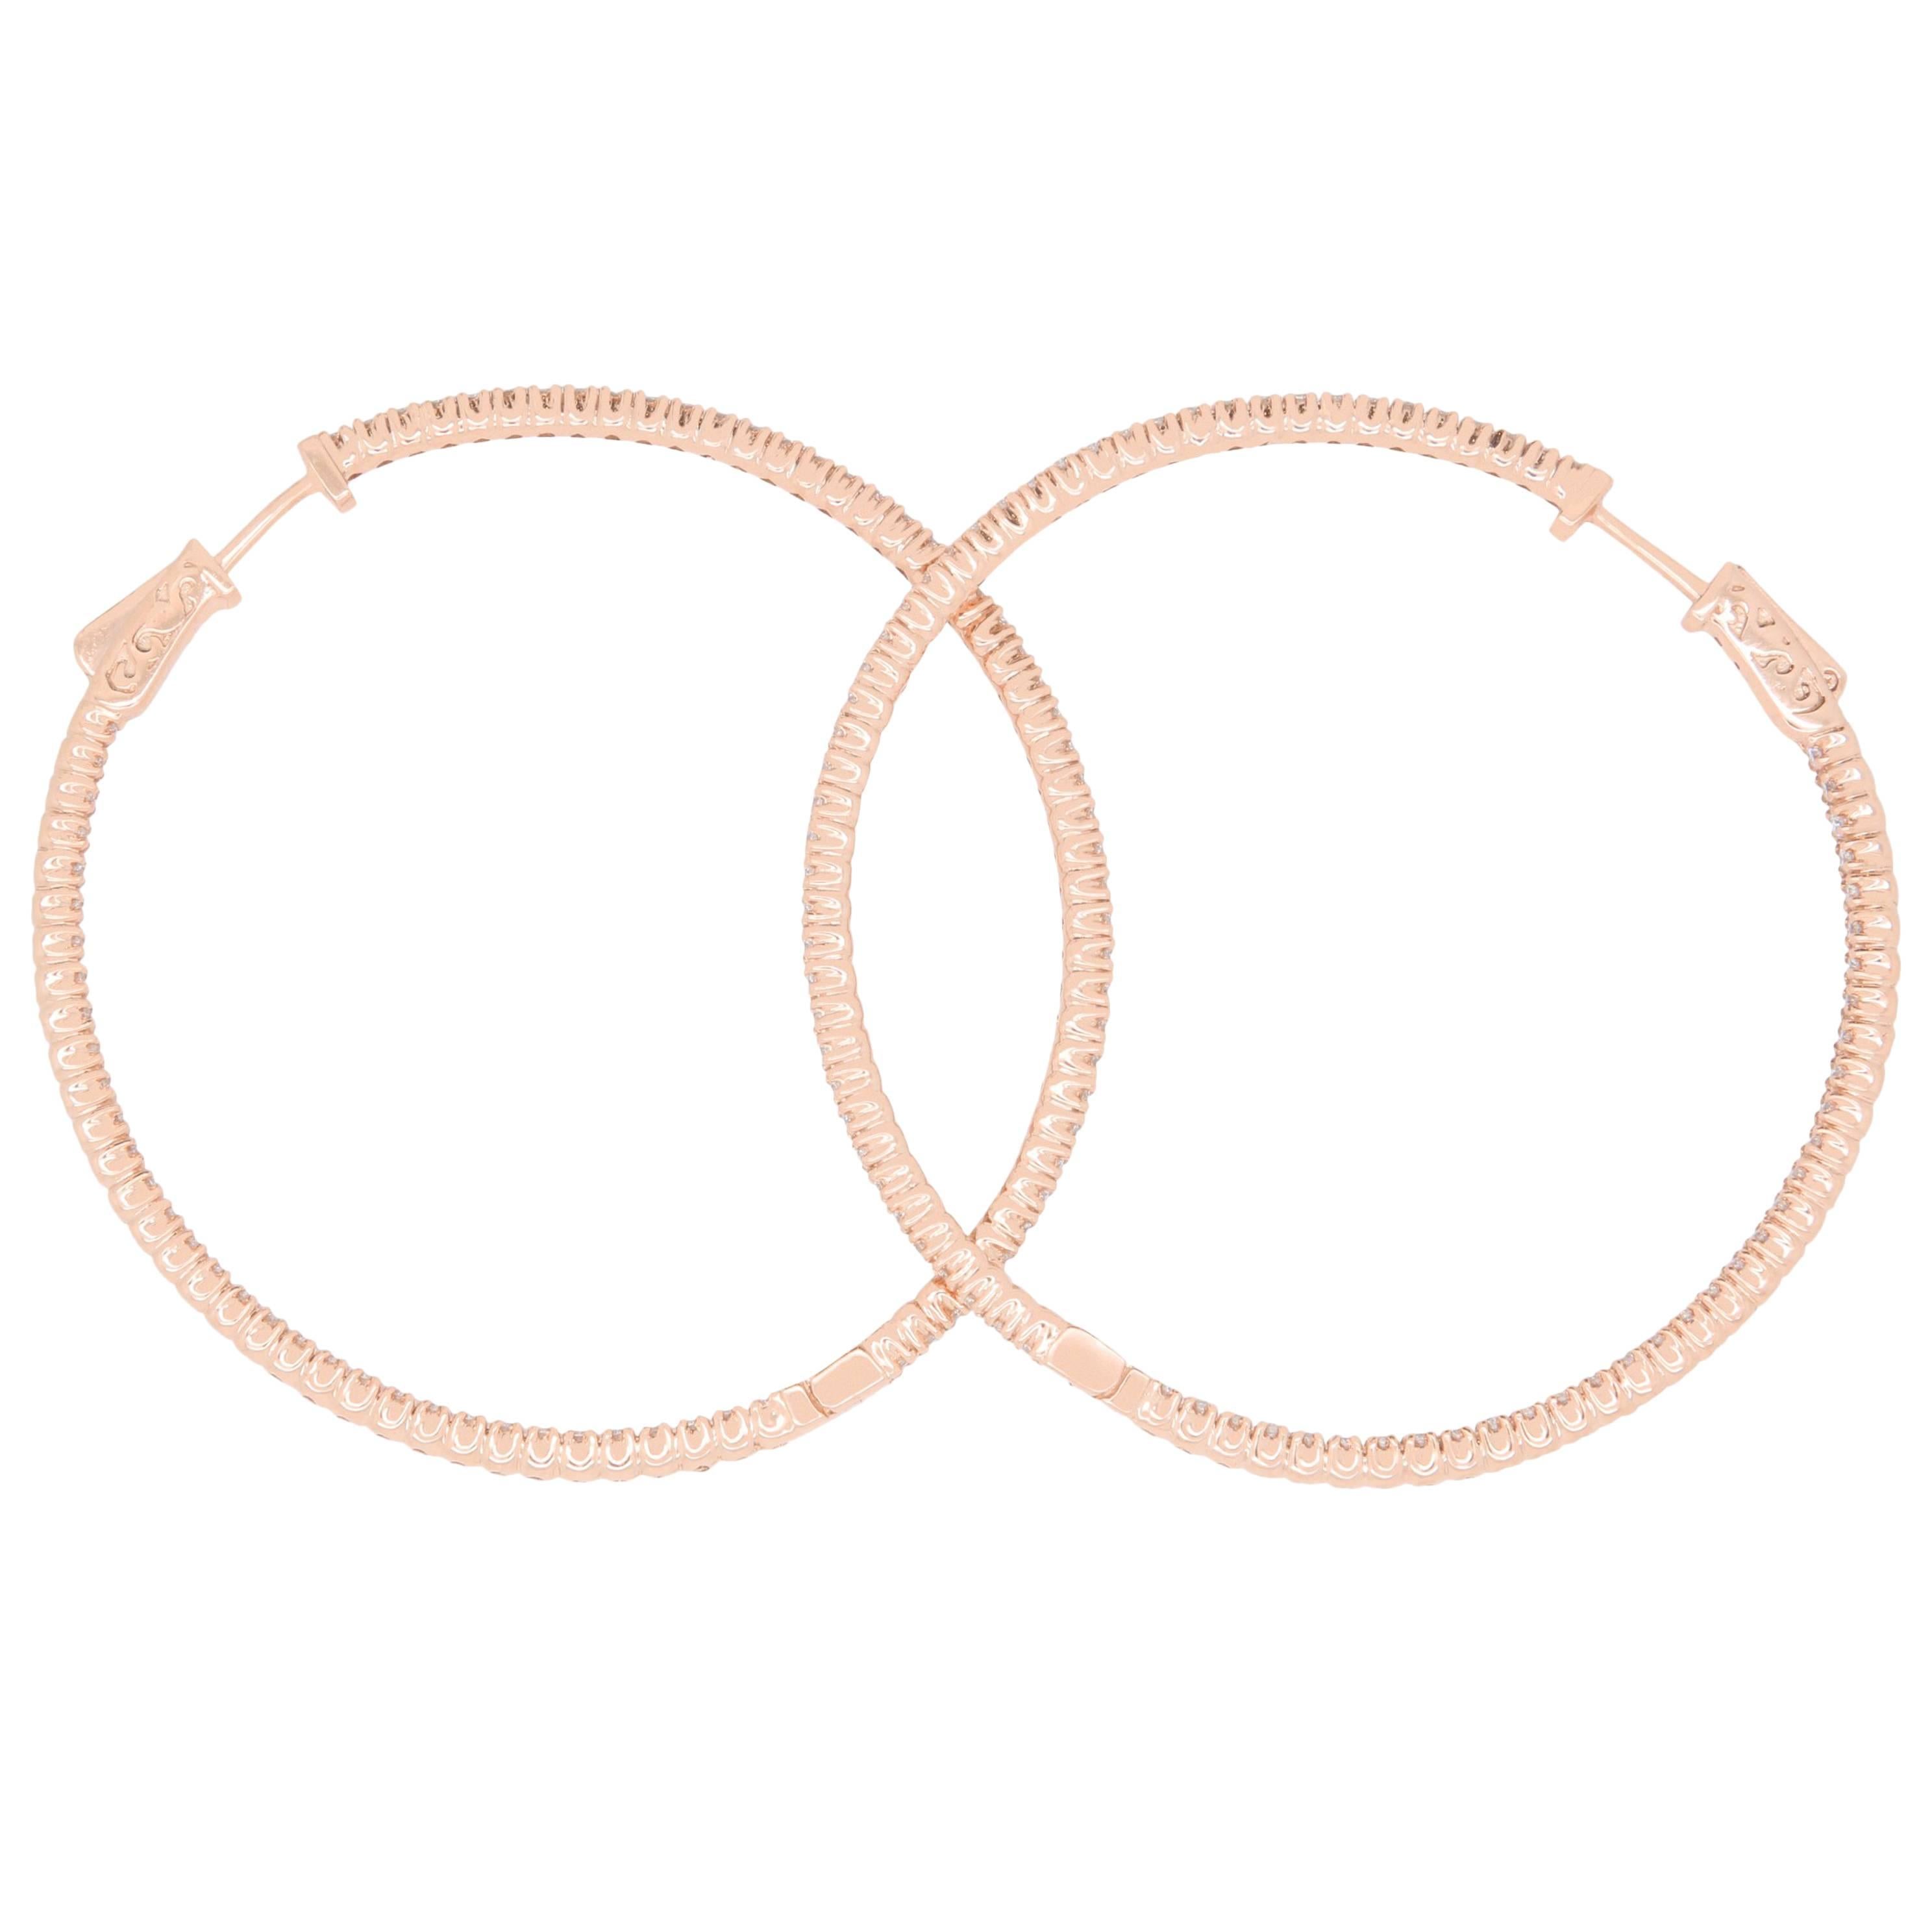 Contemporary White Diamond Inside Out Round Hoops Fashion Earrings 14k Rose Gold For Sale